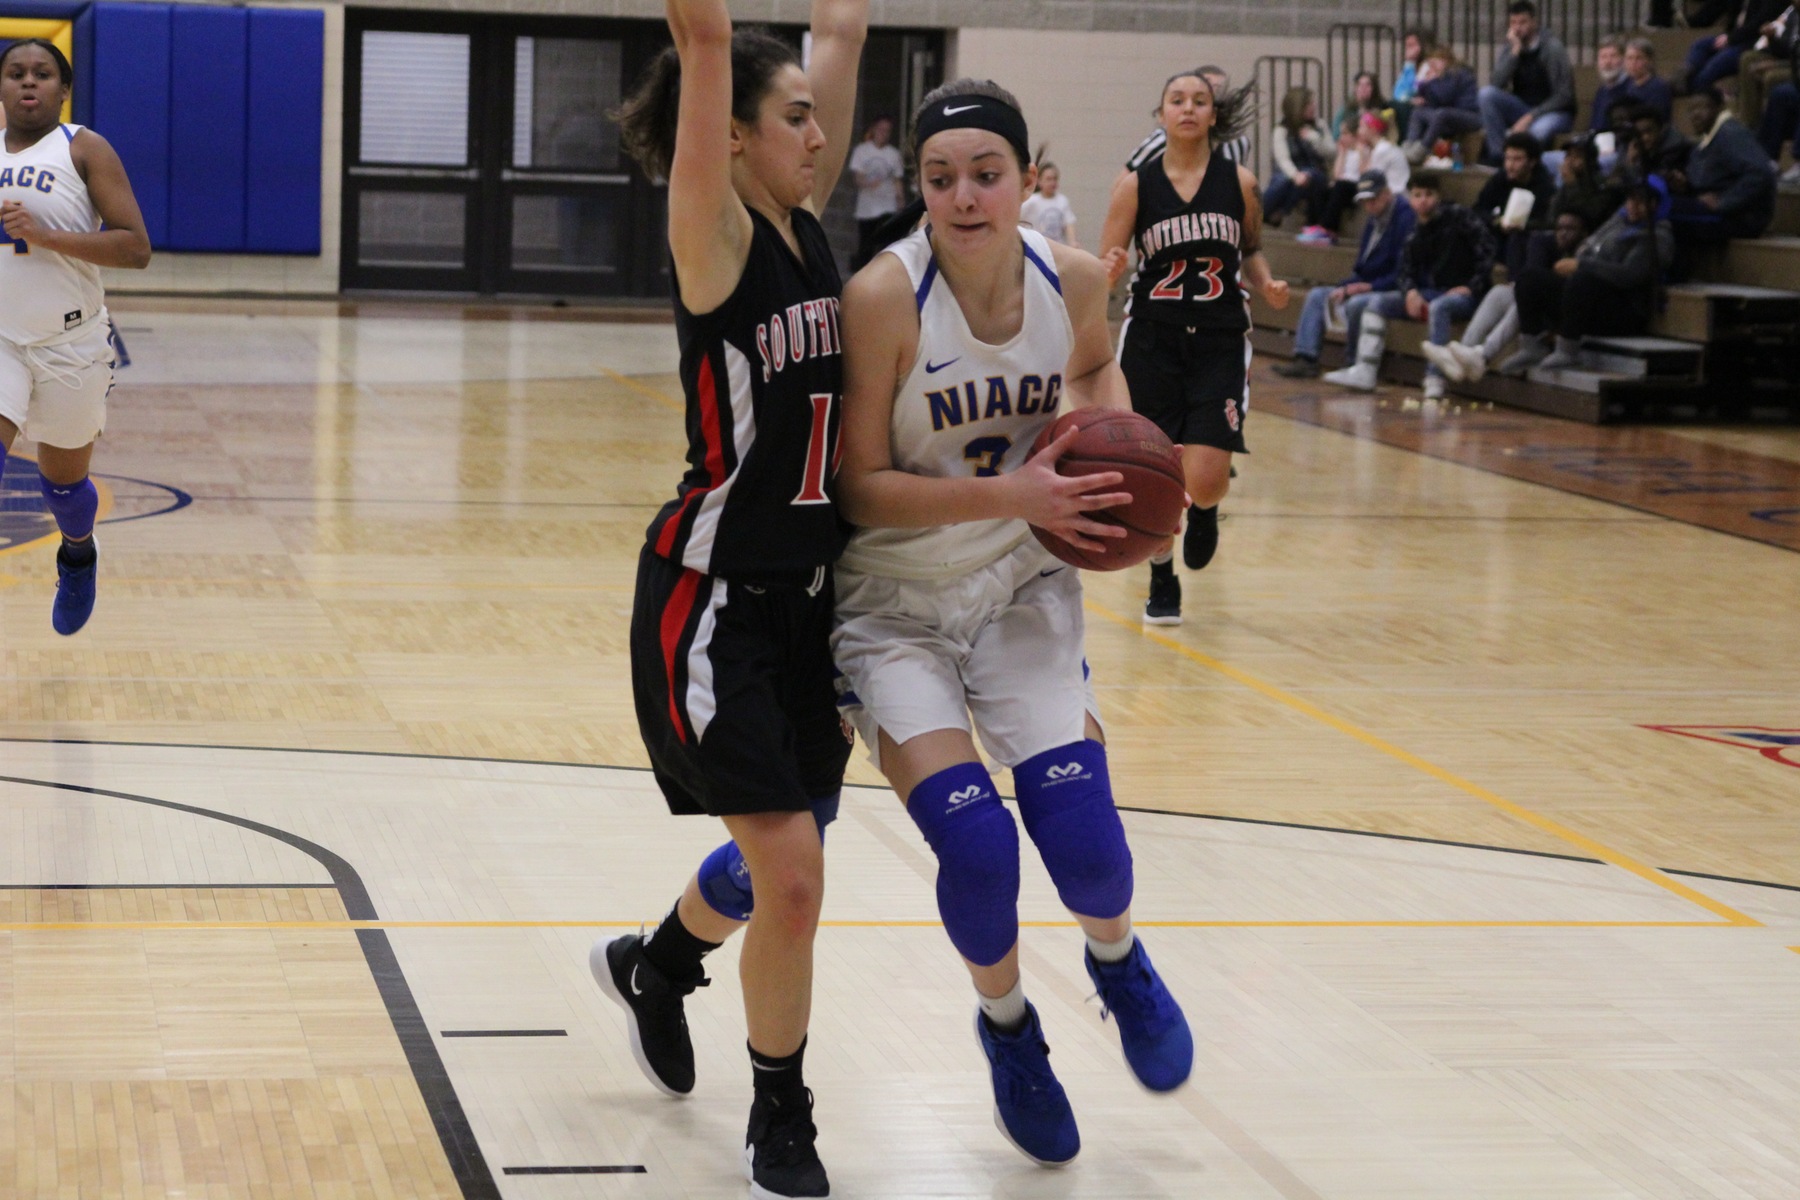 NIACC's Mandy Willems drives to the basket during last Sunday's game against Southeastern.